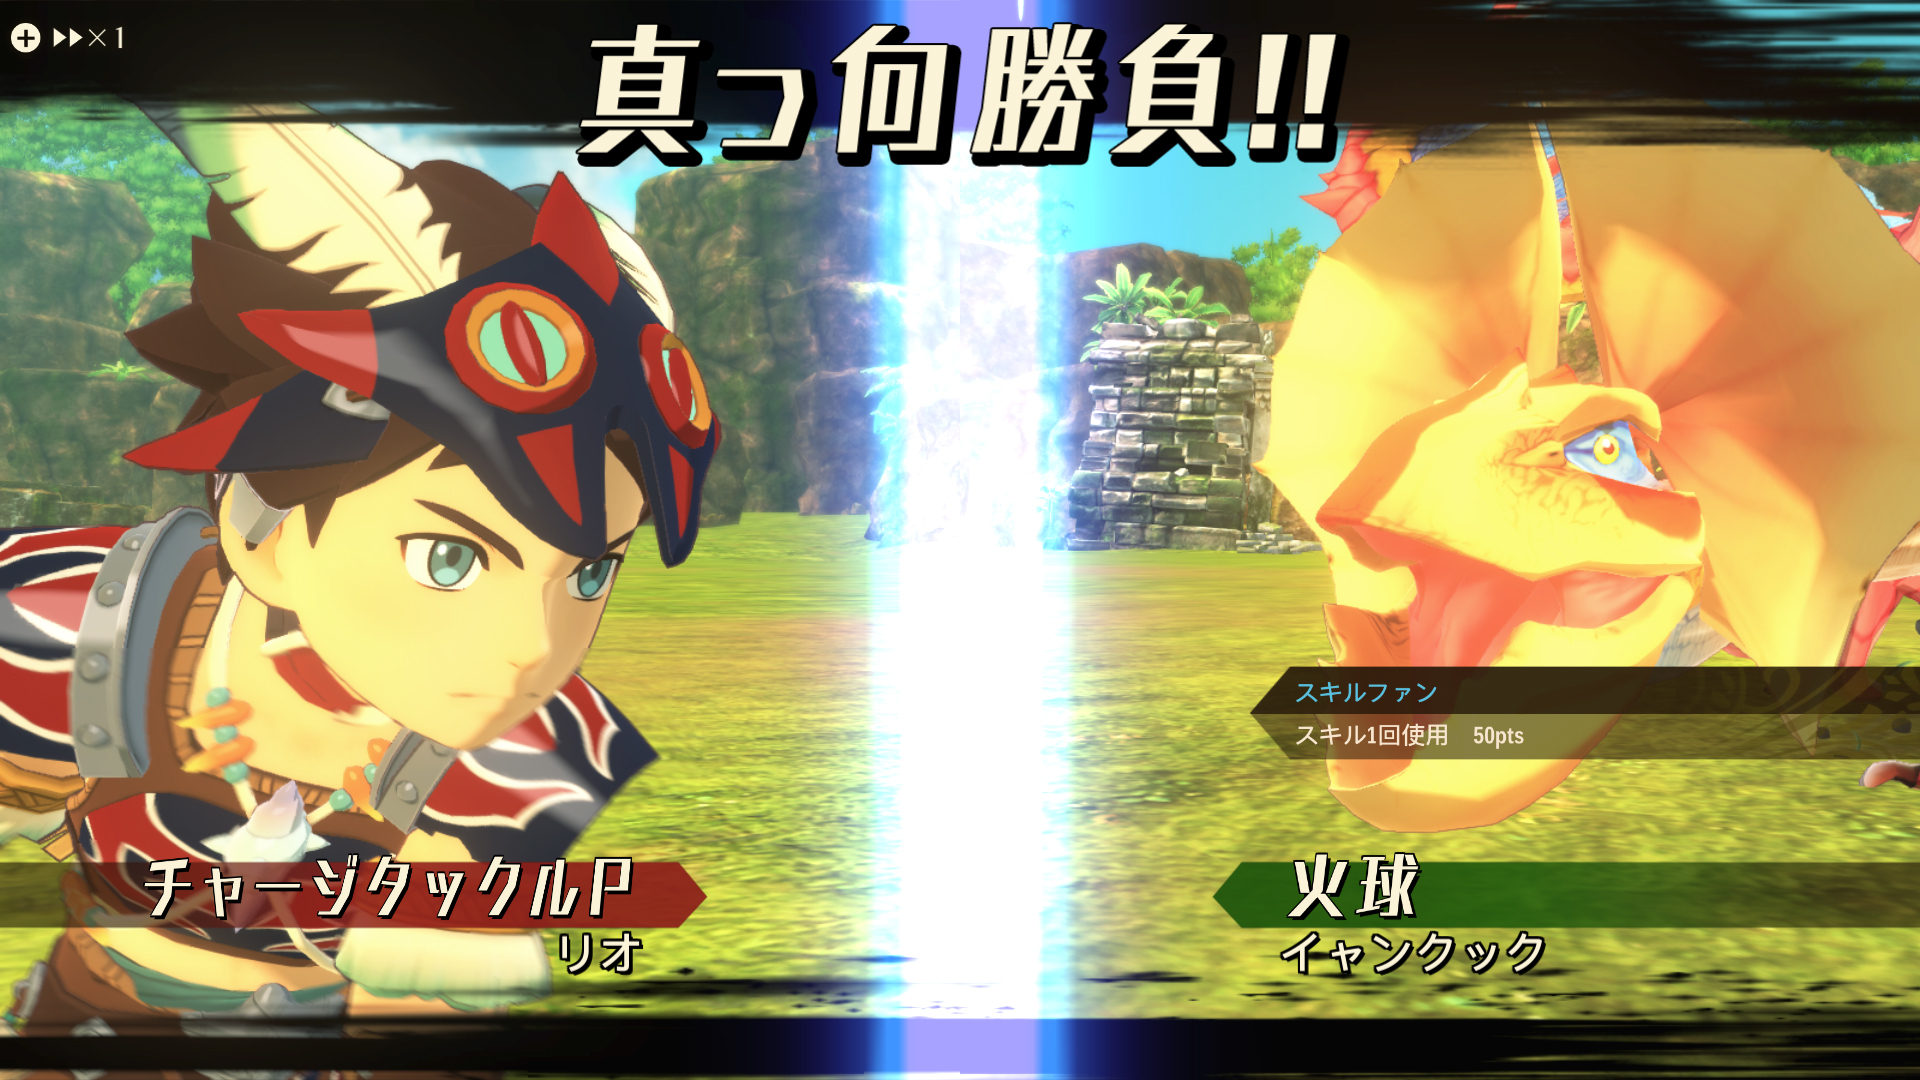 Monster Hunter Story 2 Reveals More Details Of Characters And Entourage Evolved Into A Combat System With Mh Characteristics Monster Hunter Stories 2 Wings Of Ruin Newsdir3